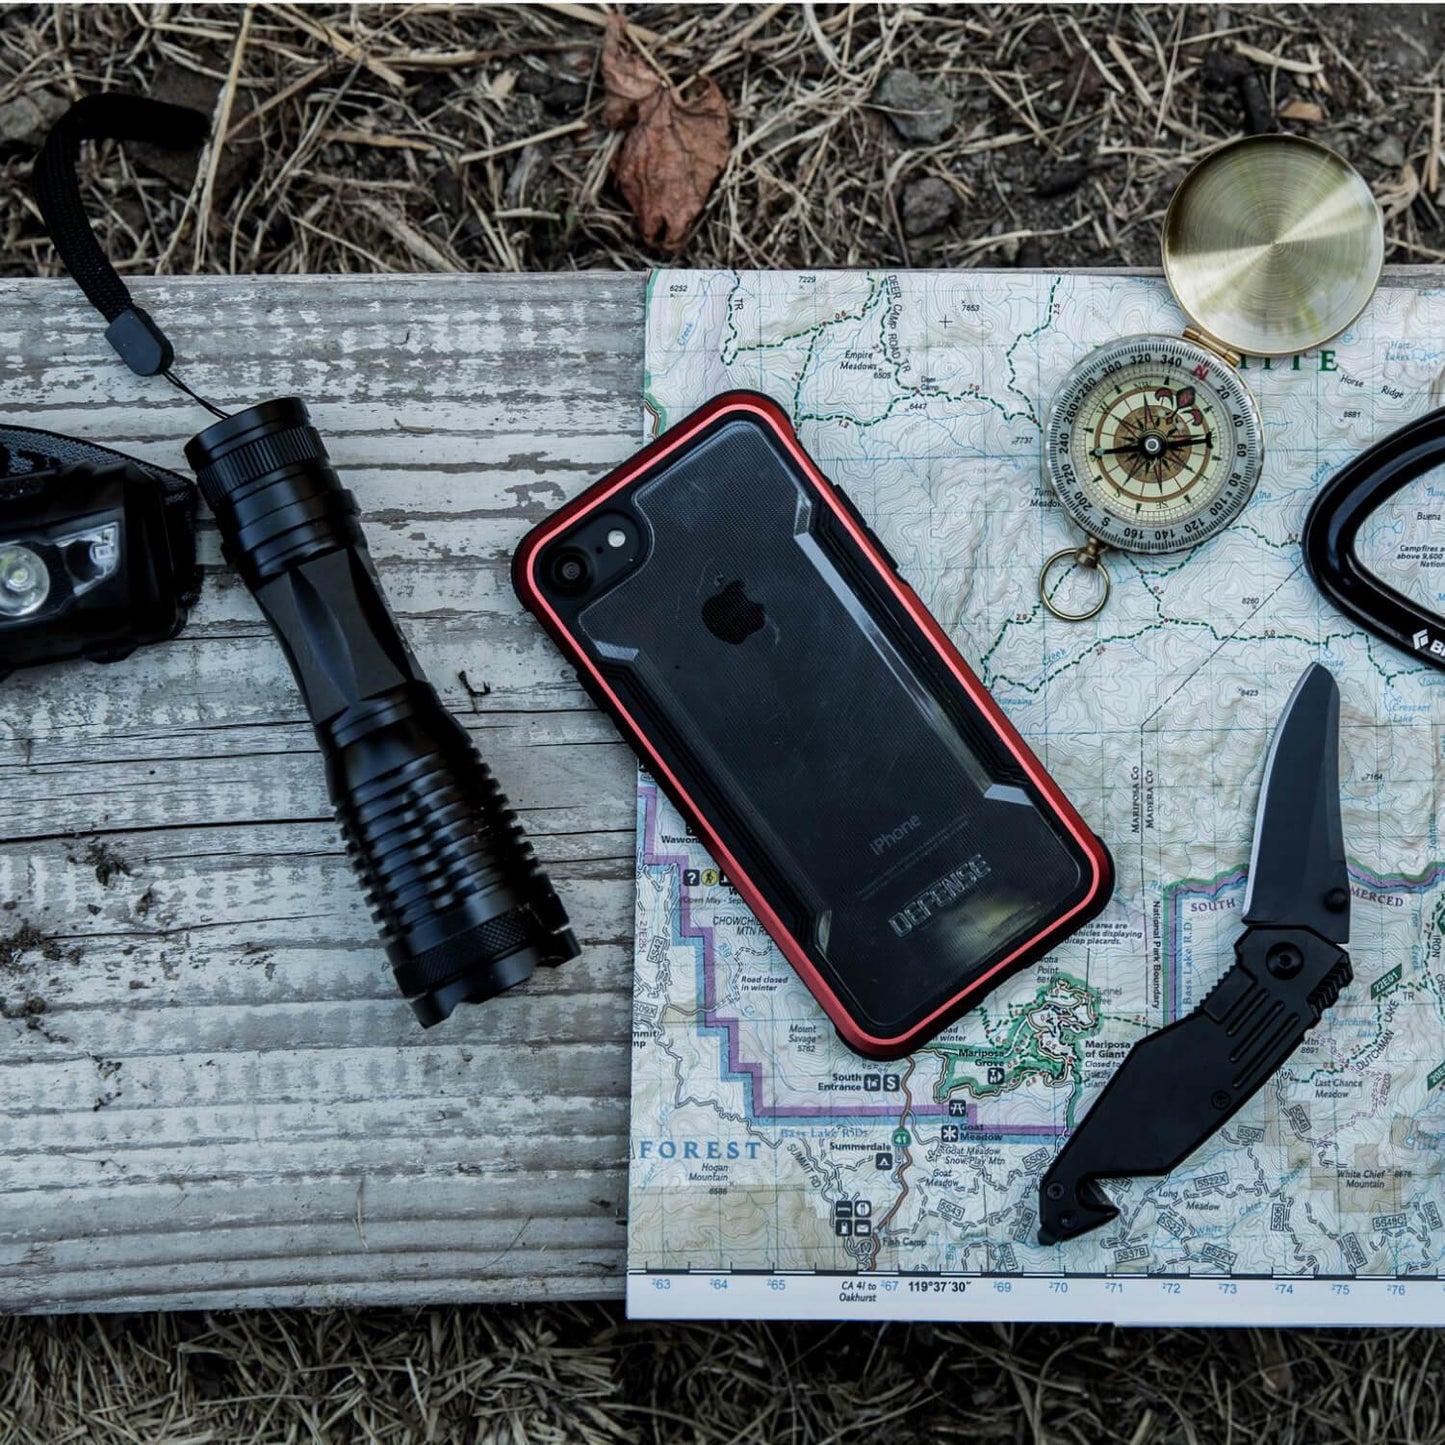 A map, a knife, a flashlight, and an iPhone SE/8/7 Case - SHIELD by Raptic are on a wooden table.